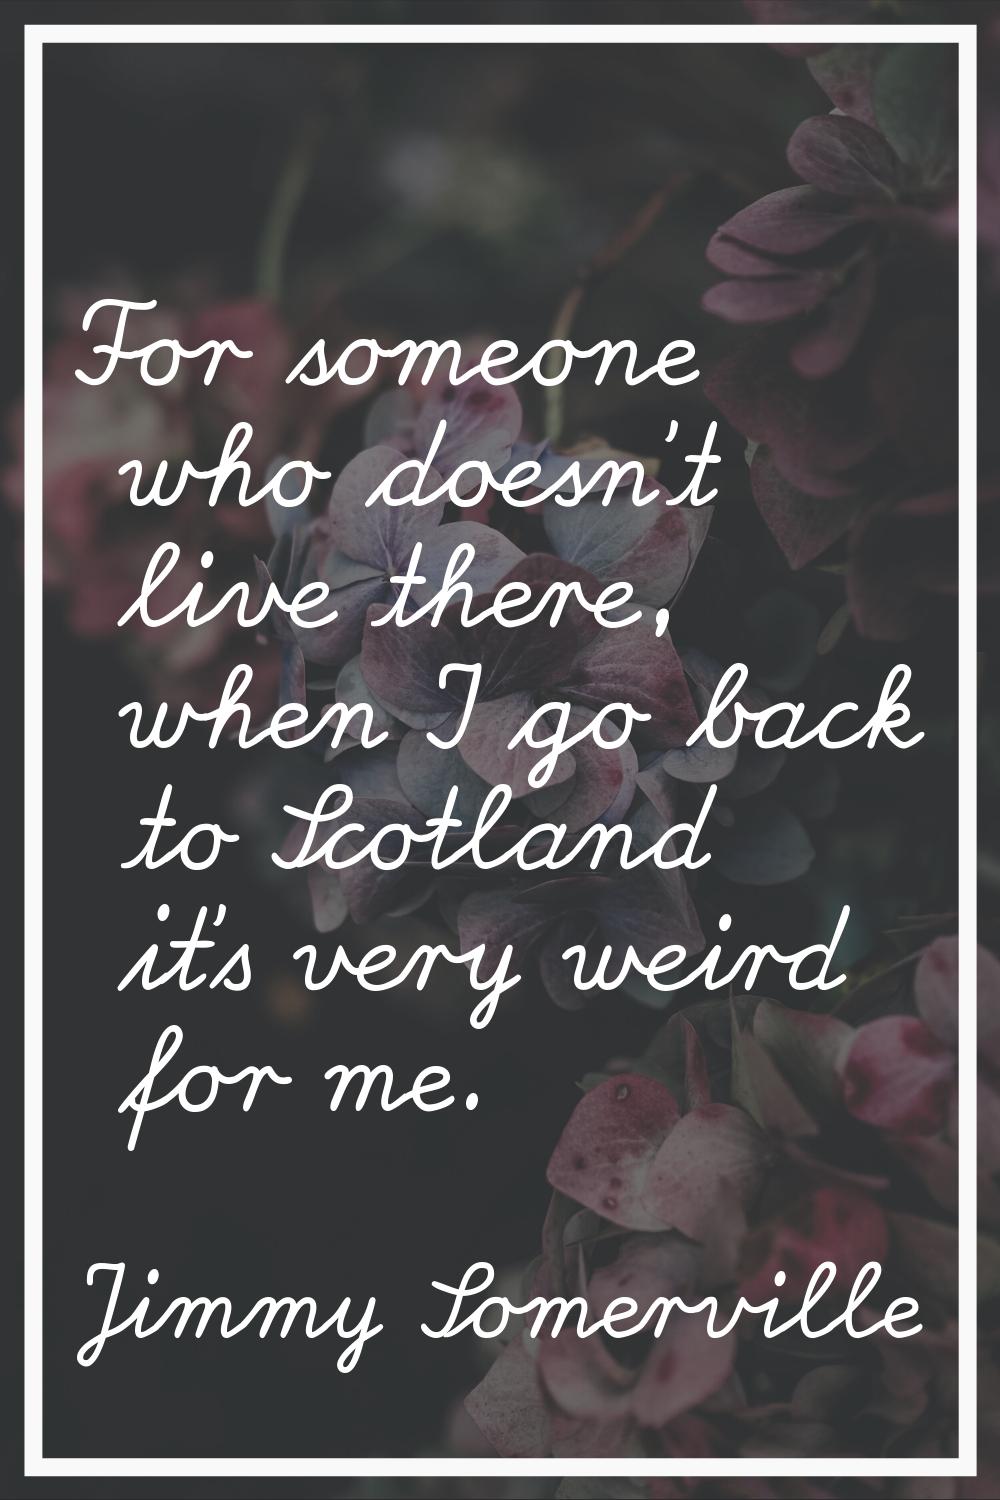 For someone who doesn't live there, when I go back to Scotland it's very weird for me.